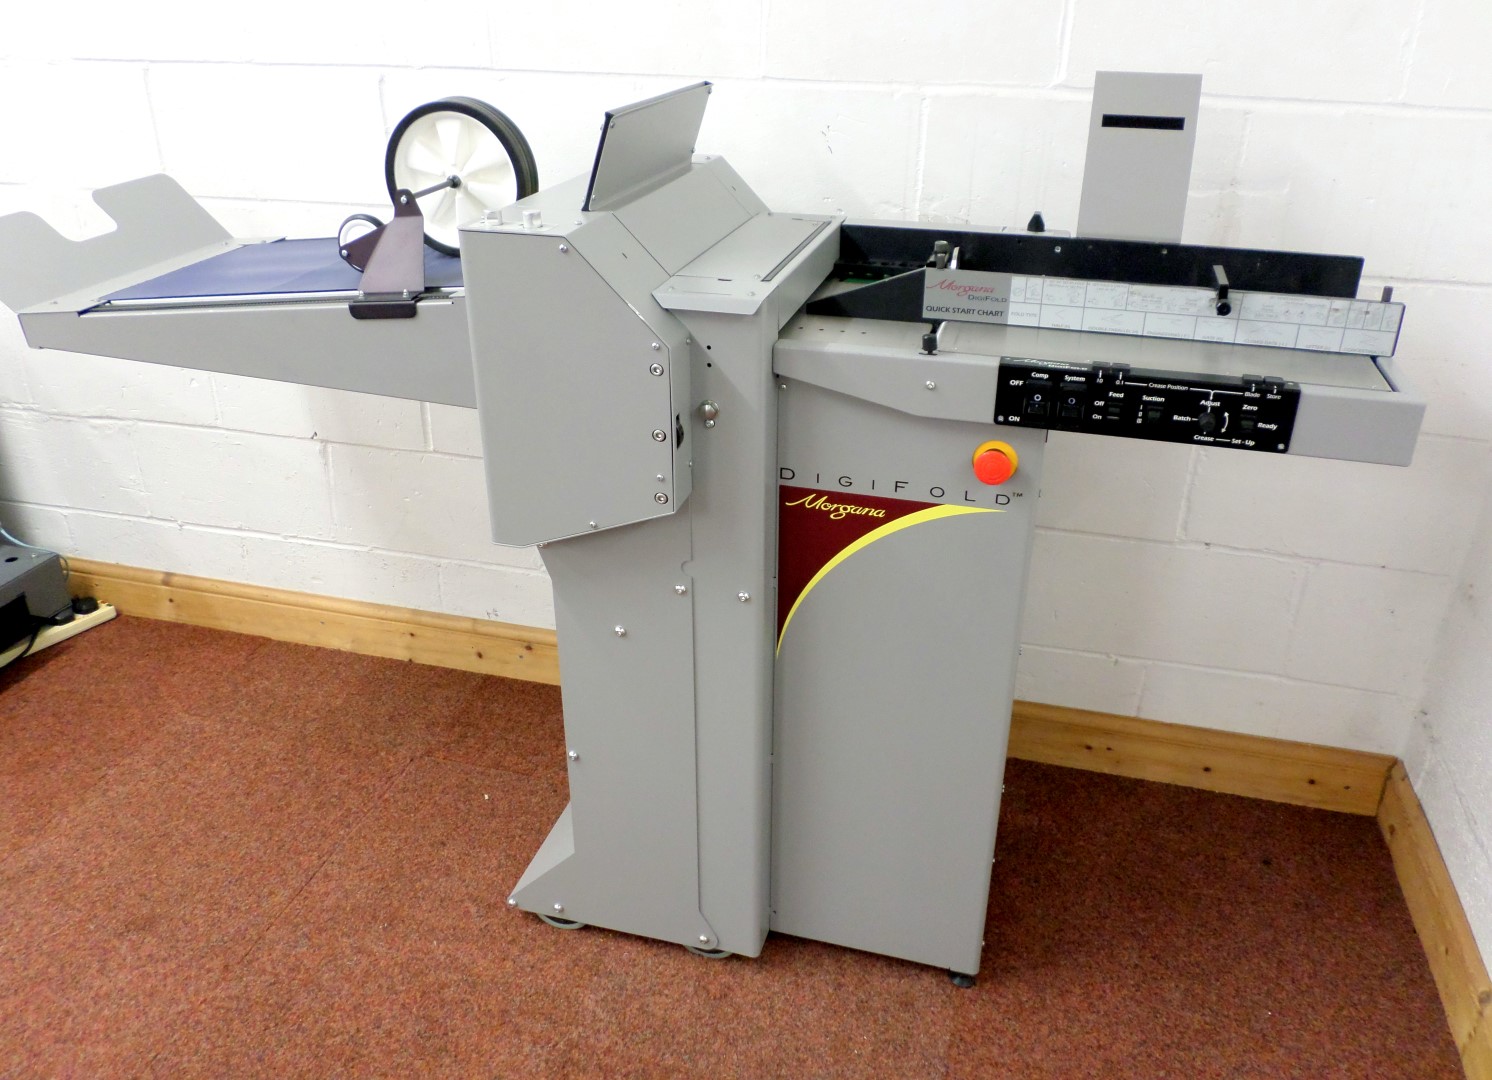 How To Get The Best Paper Folding And Creasing Machine For You?